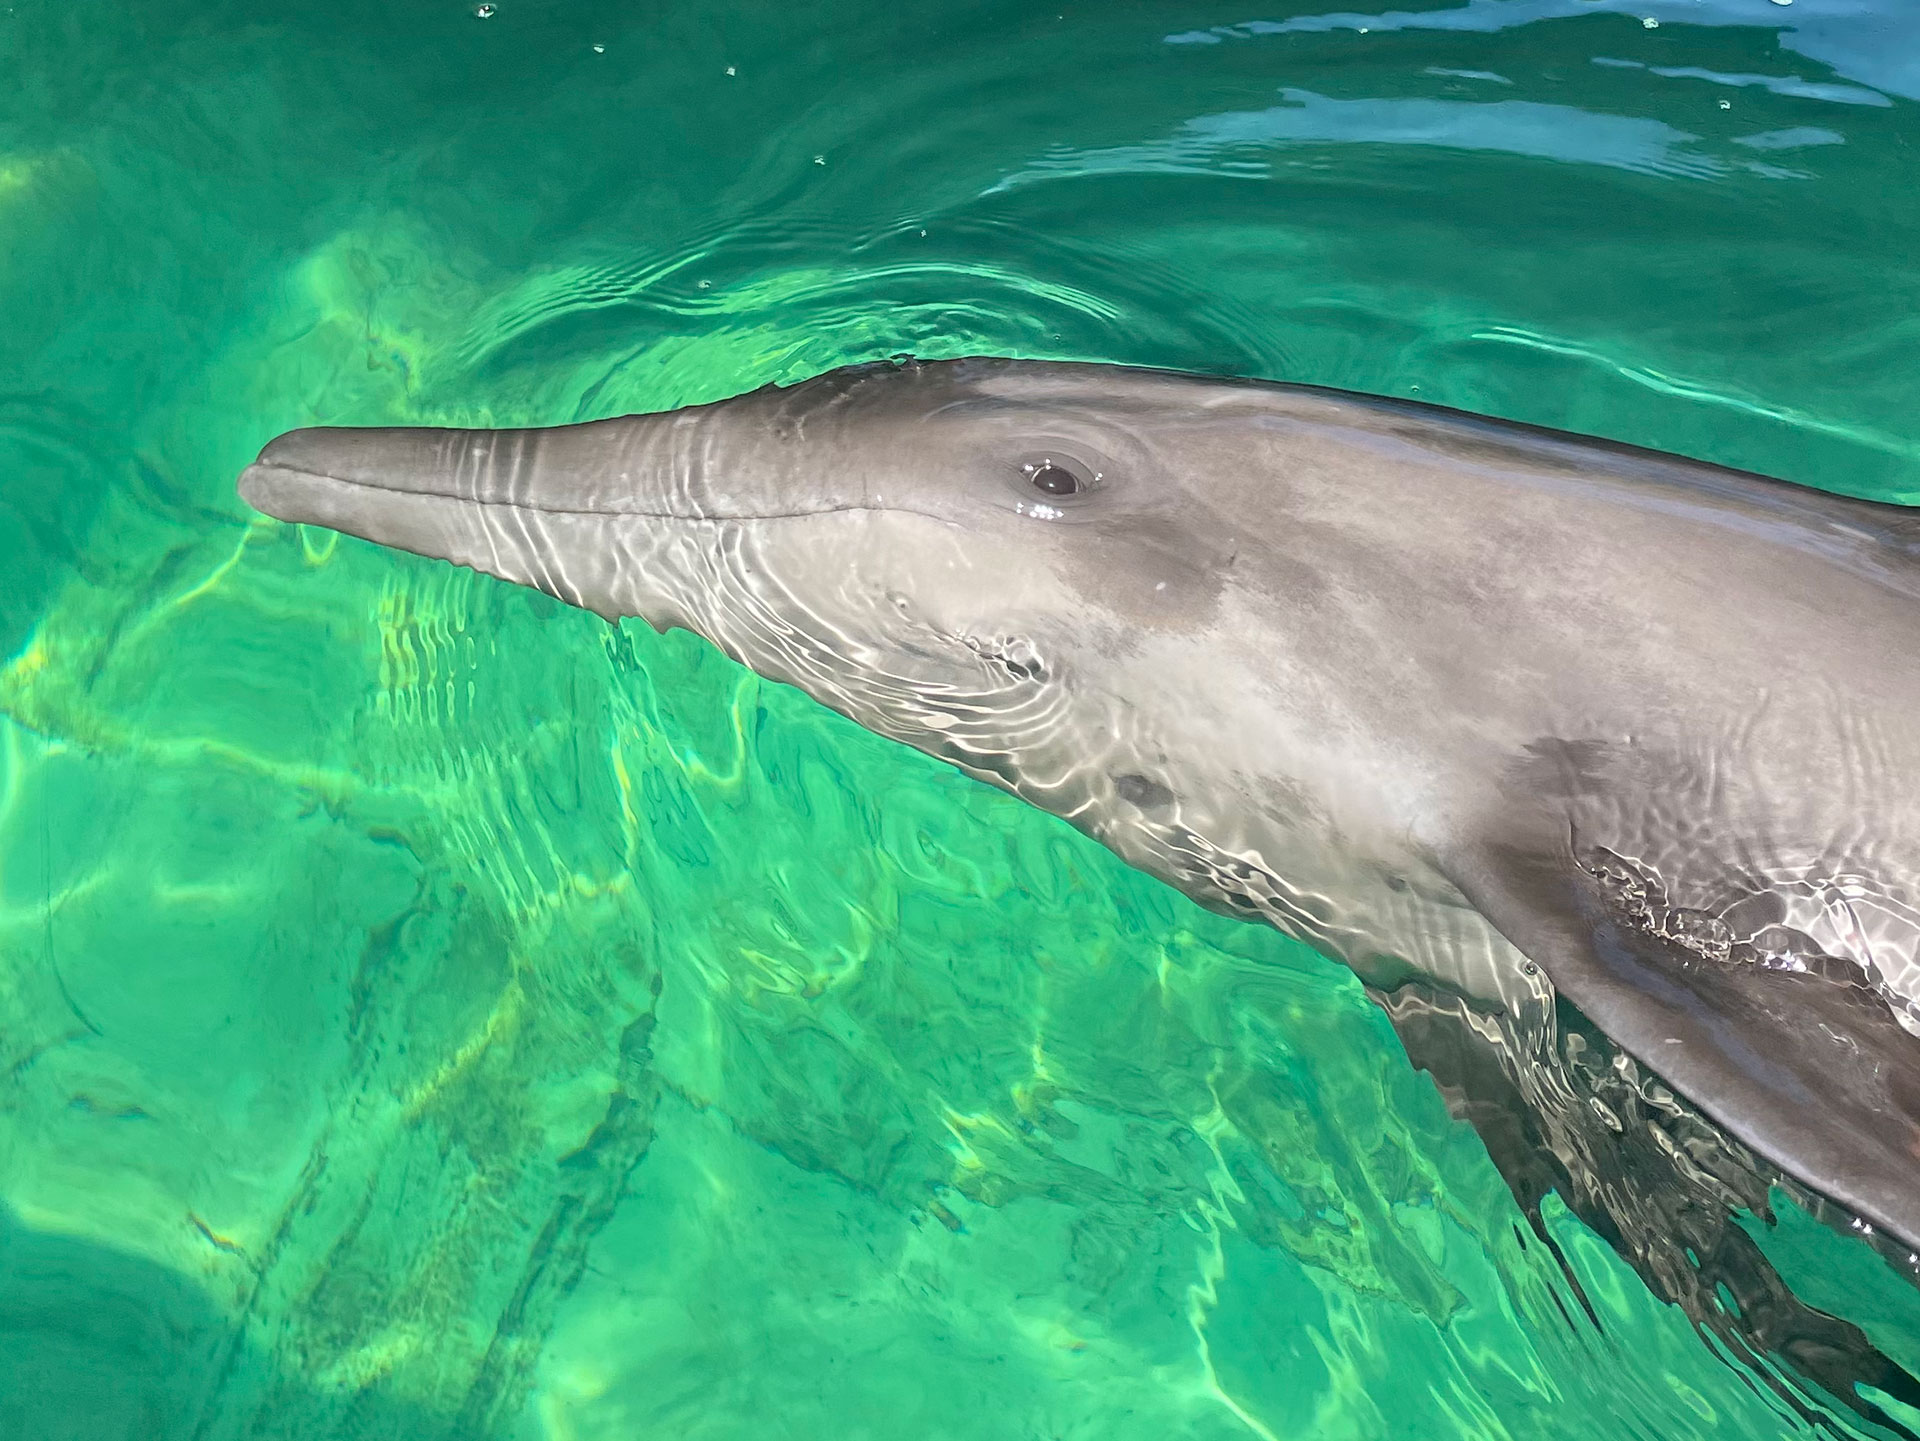 Rough-toothed dolphin